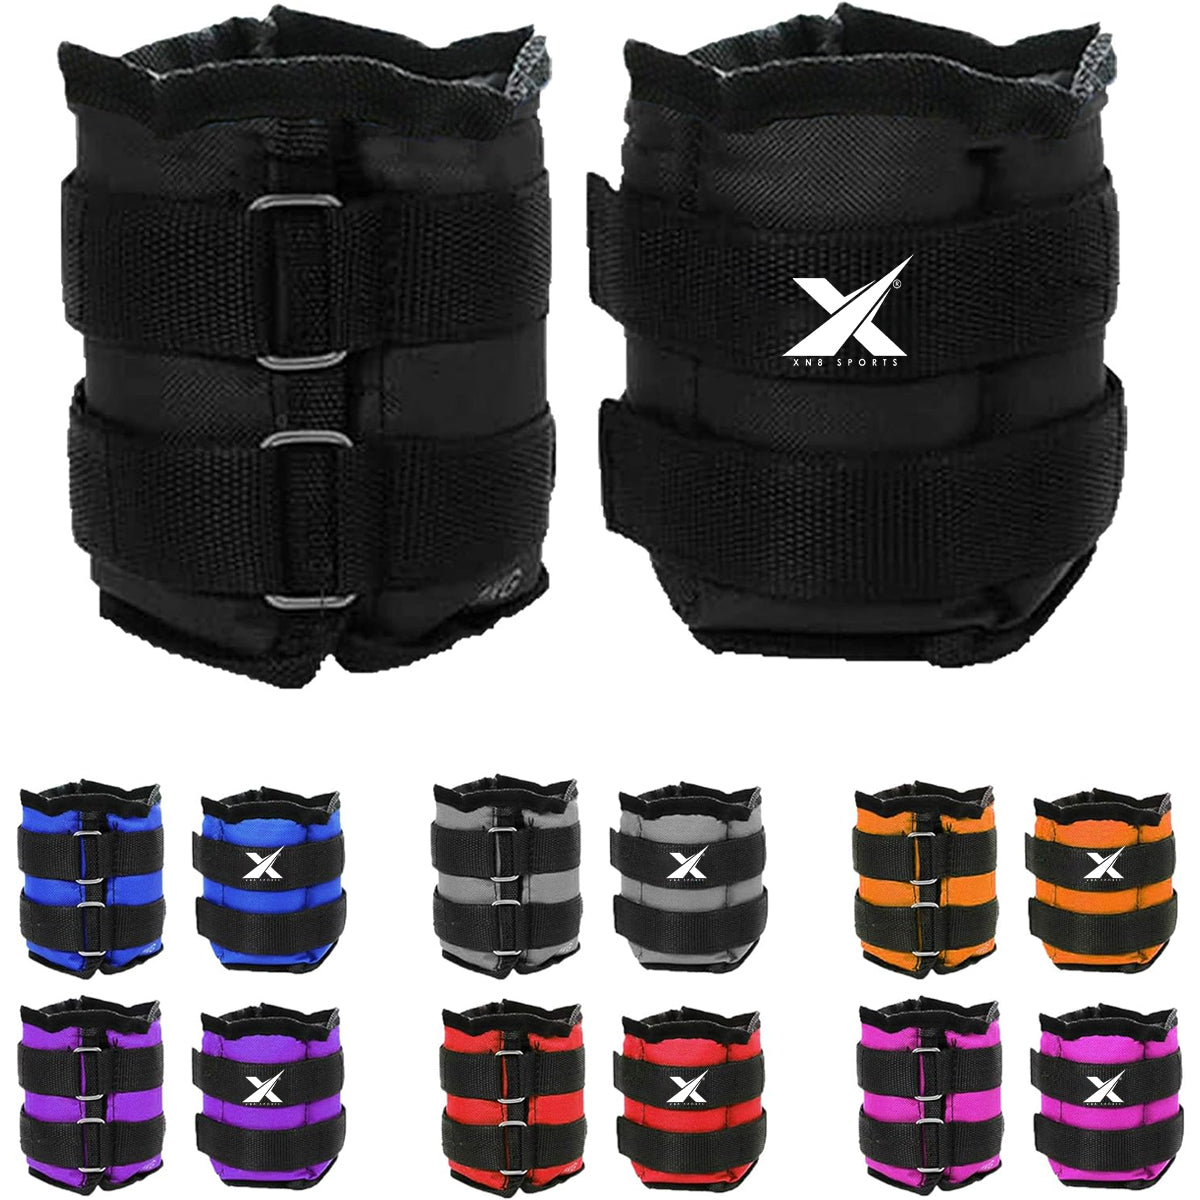 Xn8 Sports Nylon Ankle Weights